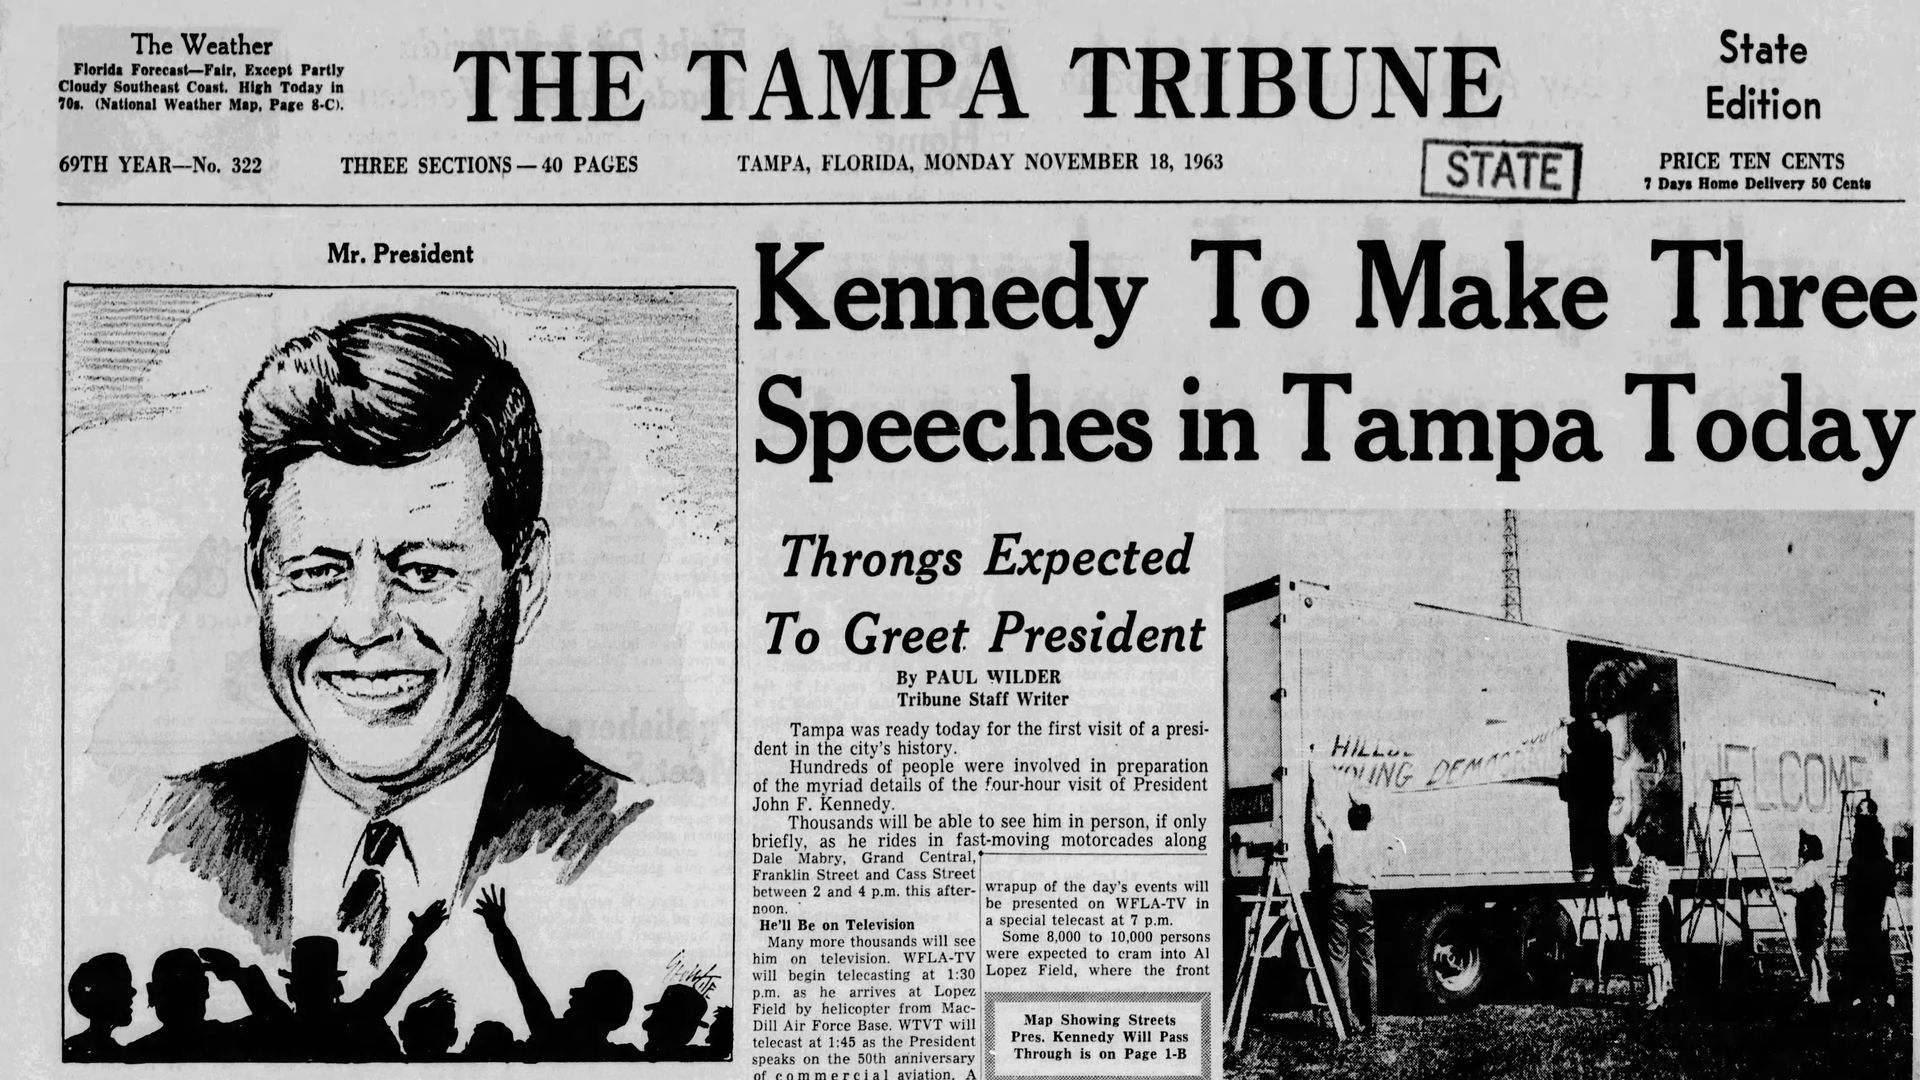  Clipping from the Tampa Tribune, Nov. 18, 1963, via Newspapers.com